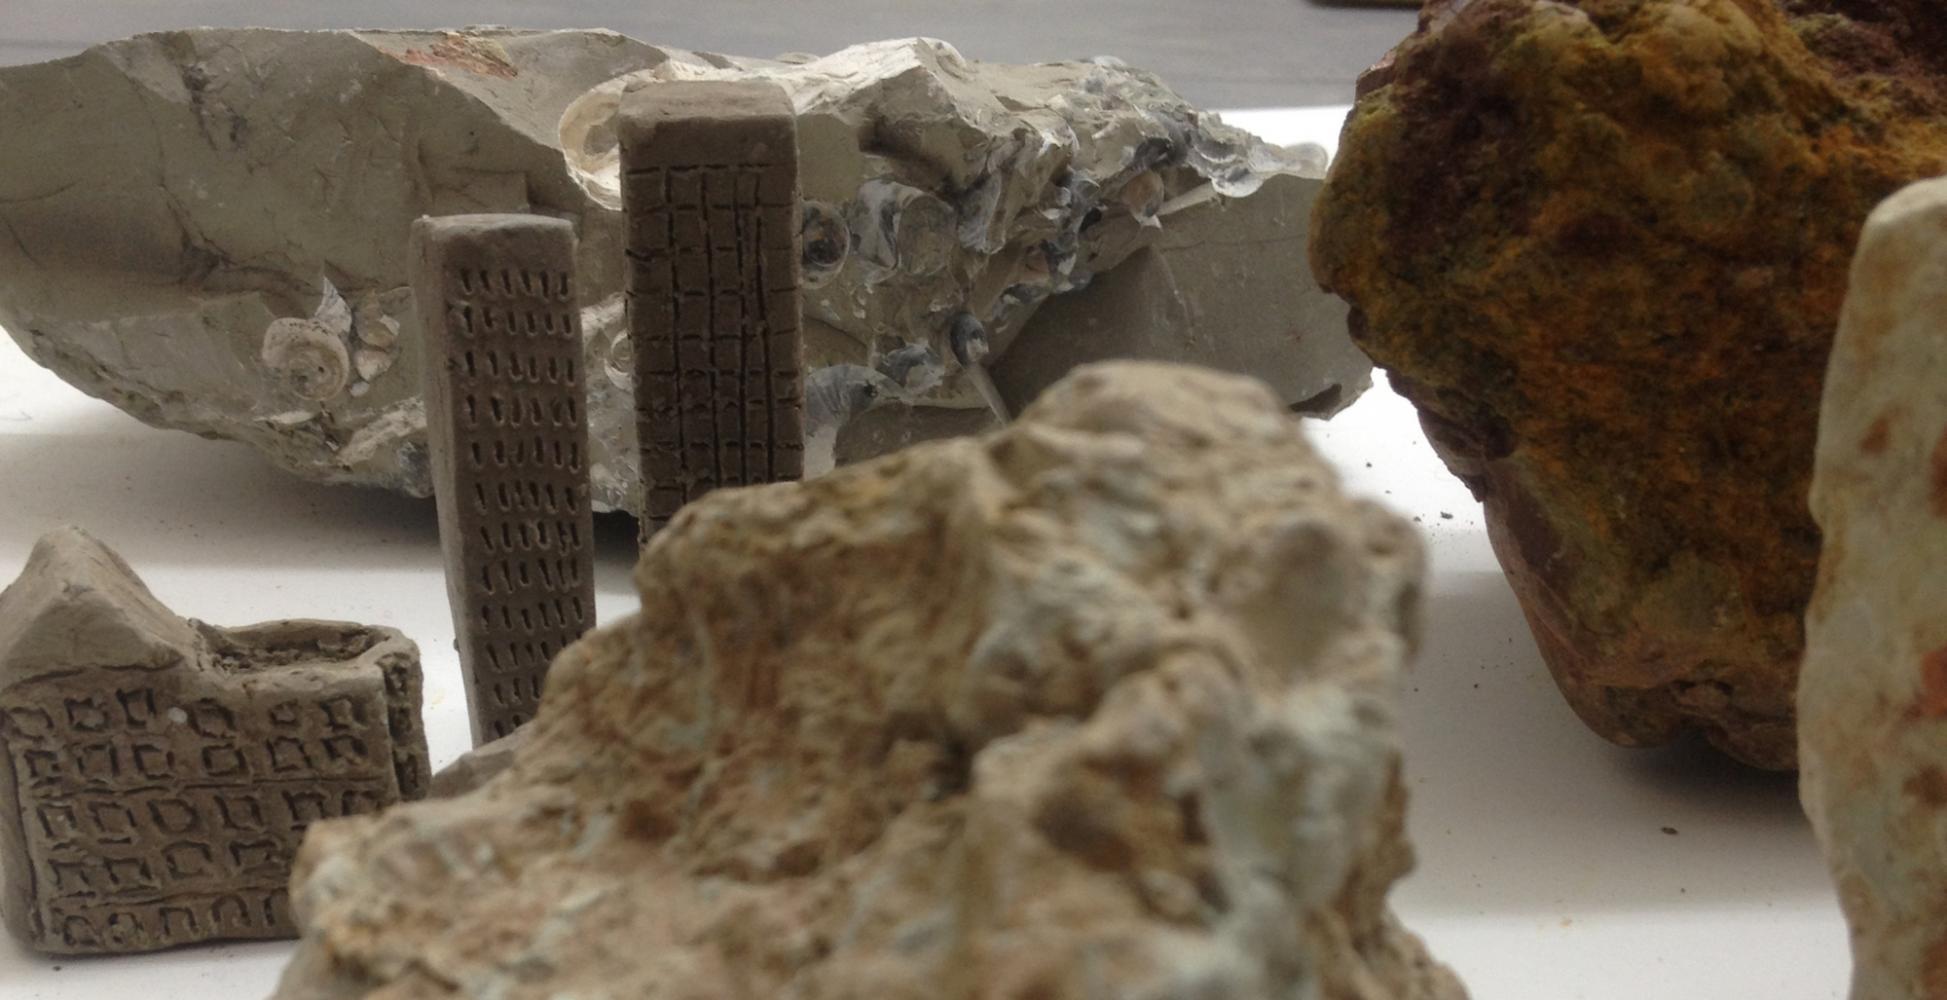 'Construction and Destruction'. Buildings made of London Clay amongst collected samples of earth from under London.